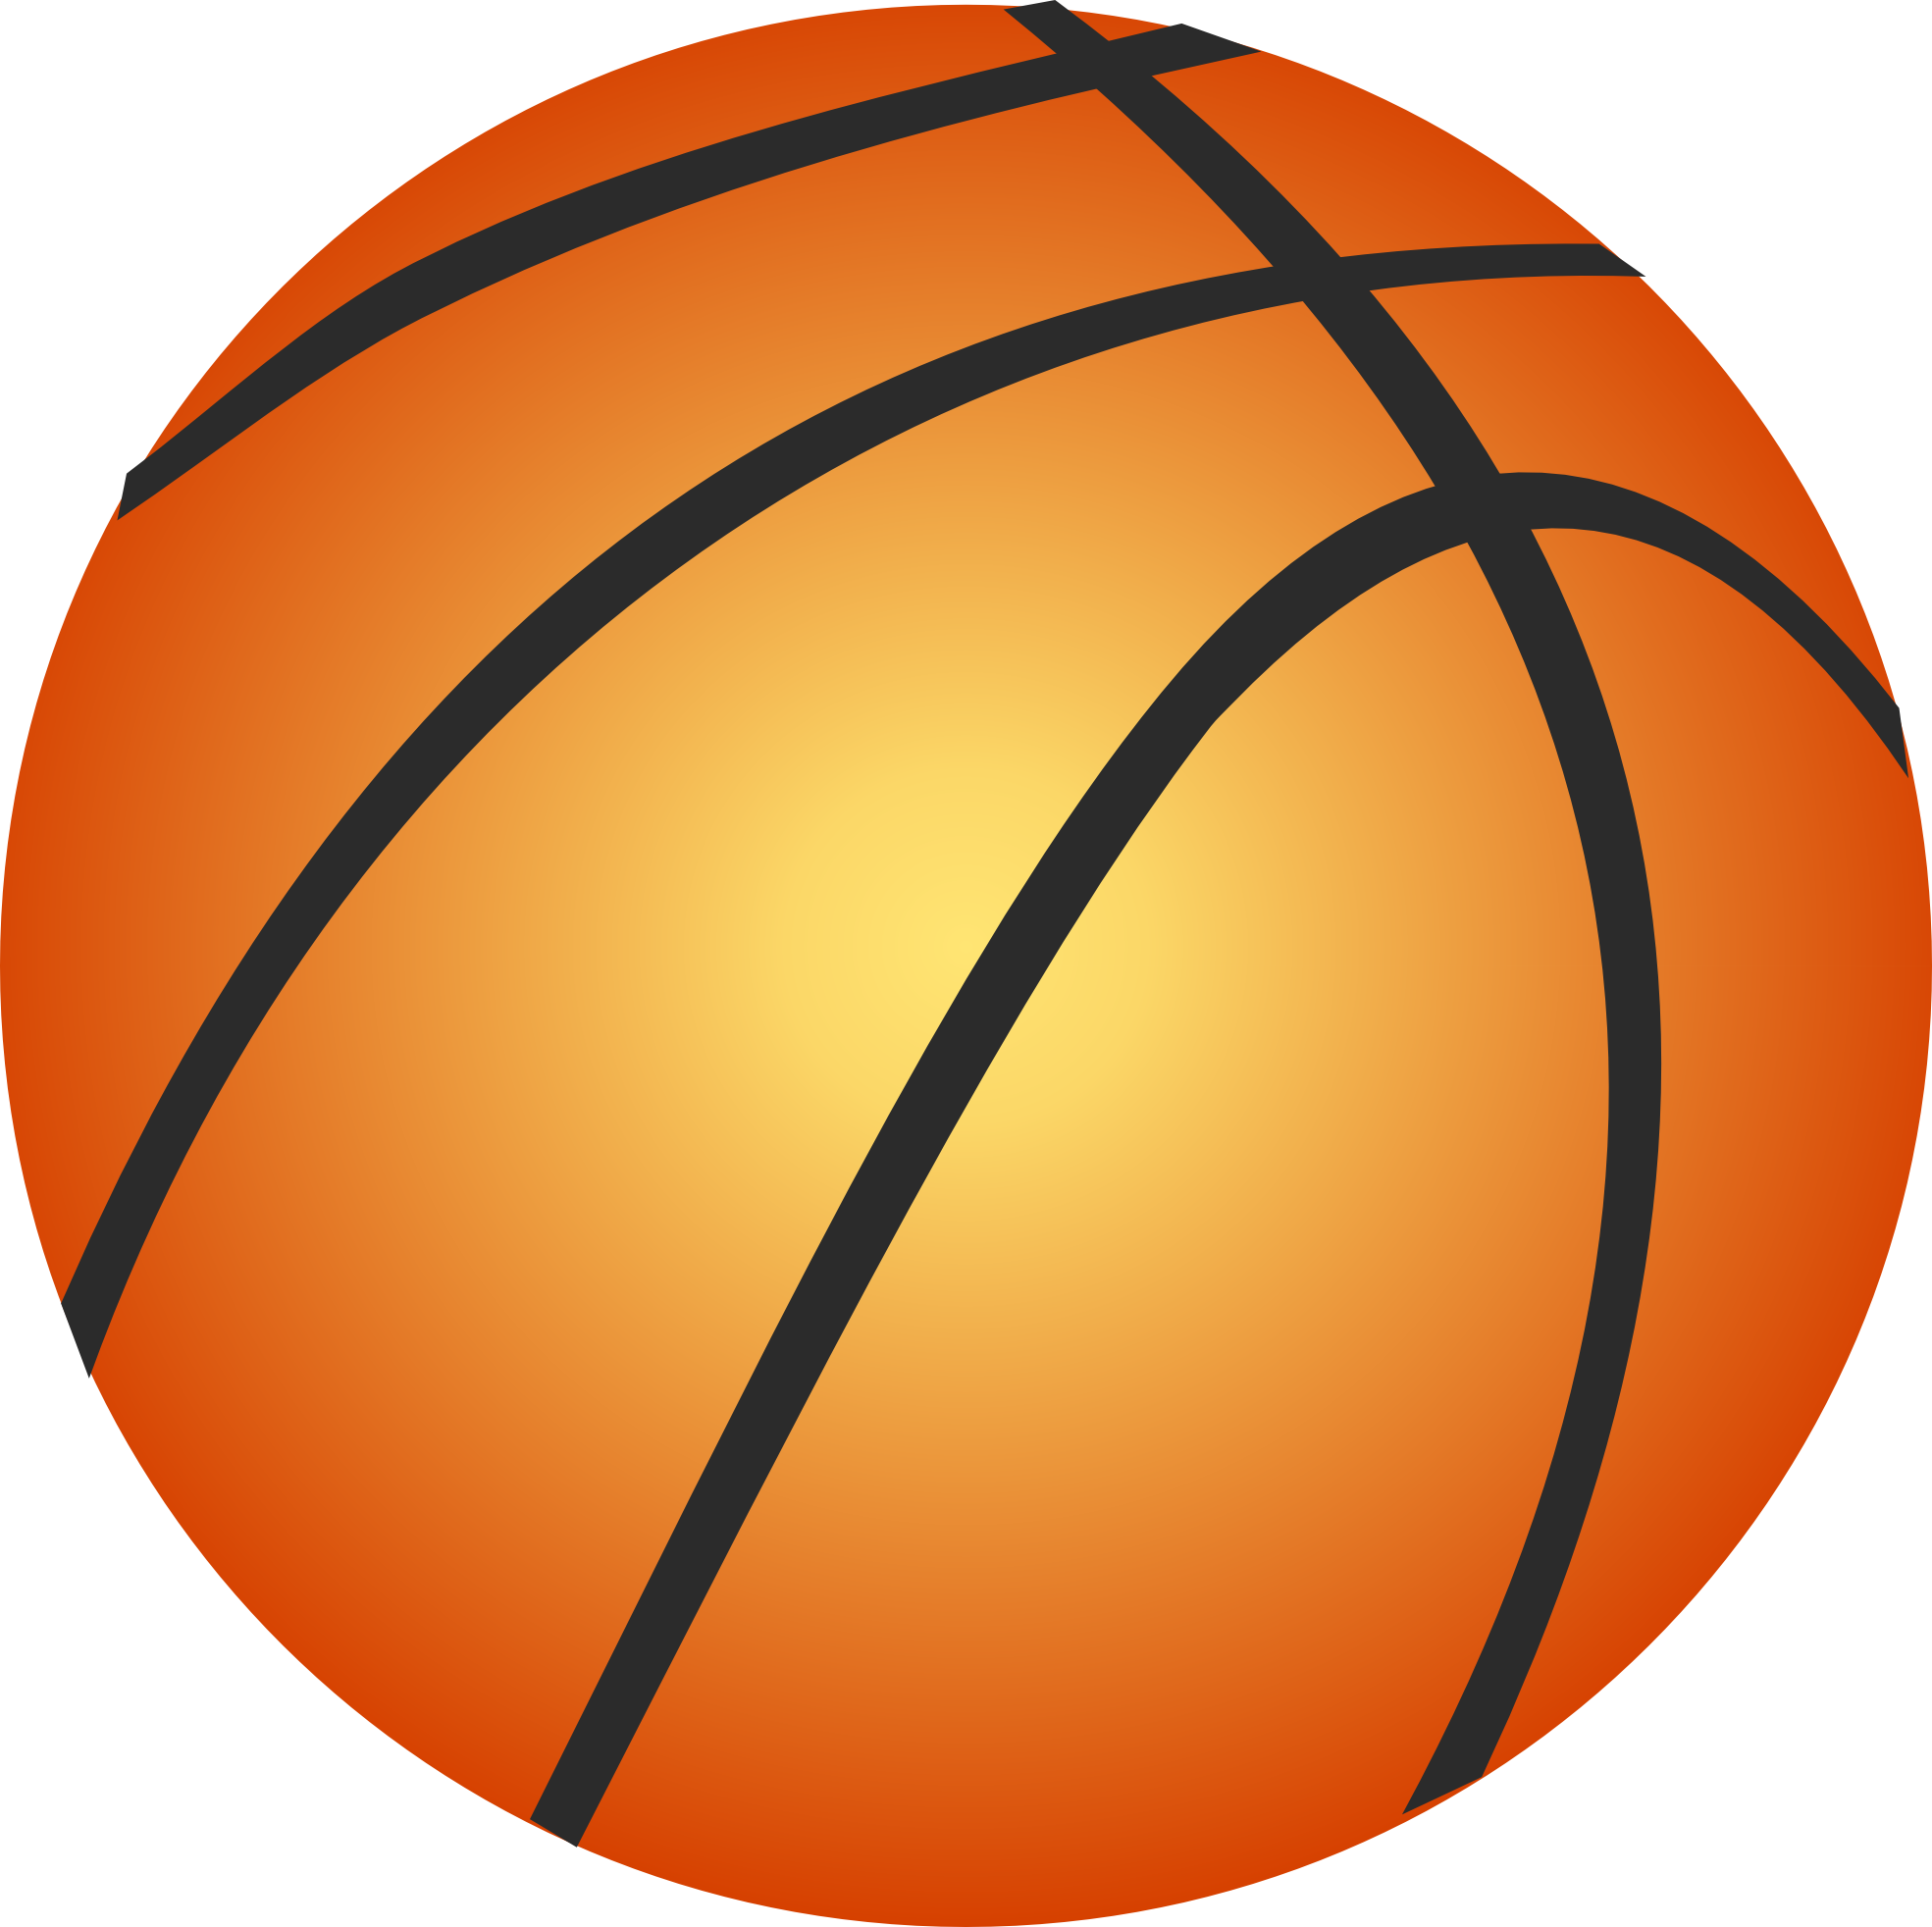 Basketball clipart free clipart image 2.